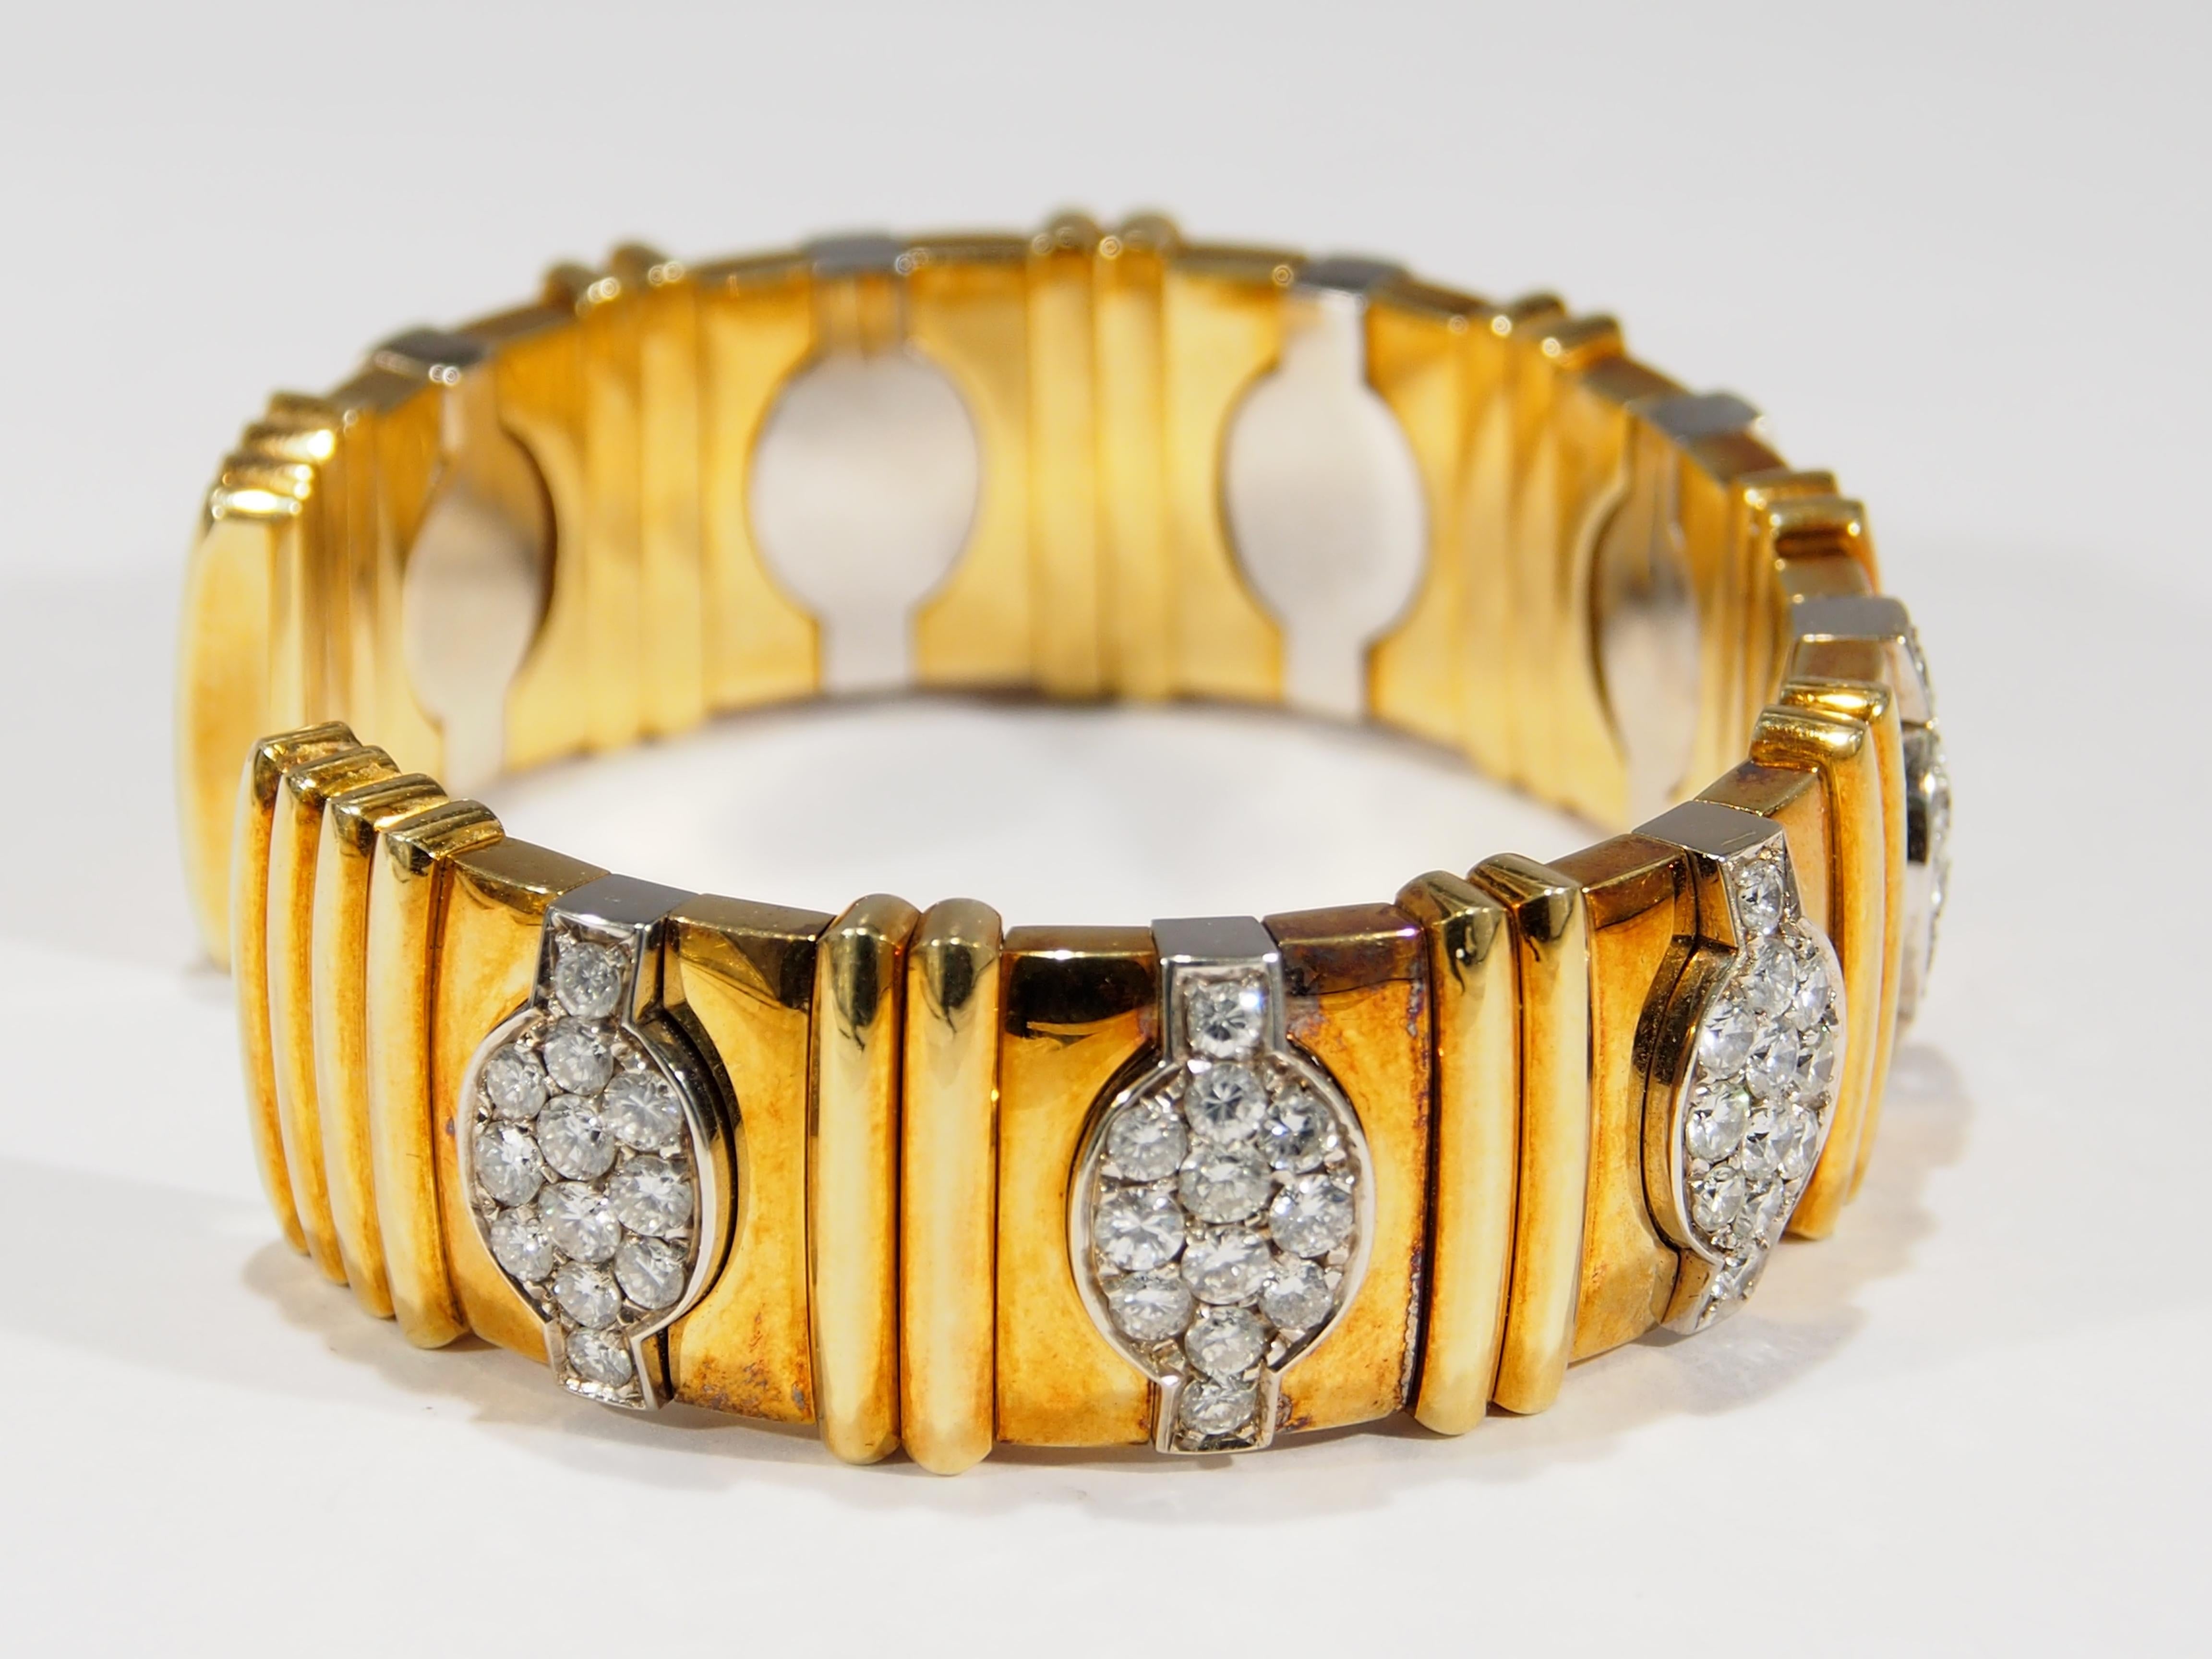 This is a stunning 18K Two Tone Gold Wide Cuff Bracelet created with Hand-Made details. The Bracelet has (96) Round Brilliant Cut Diamonds set in 8 sections. The Diamonds are G-H in color, VS in clarity and approximately 6.40 total weight. The